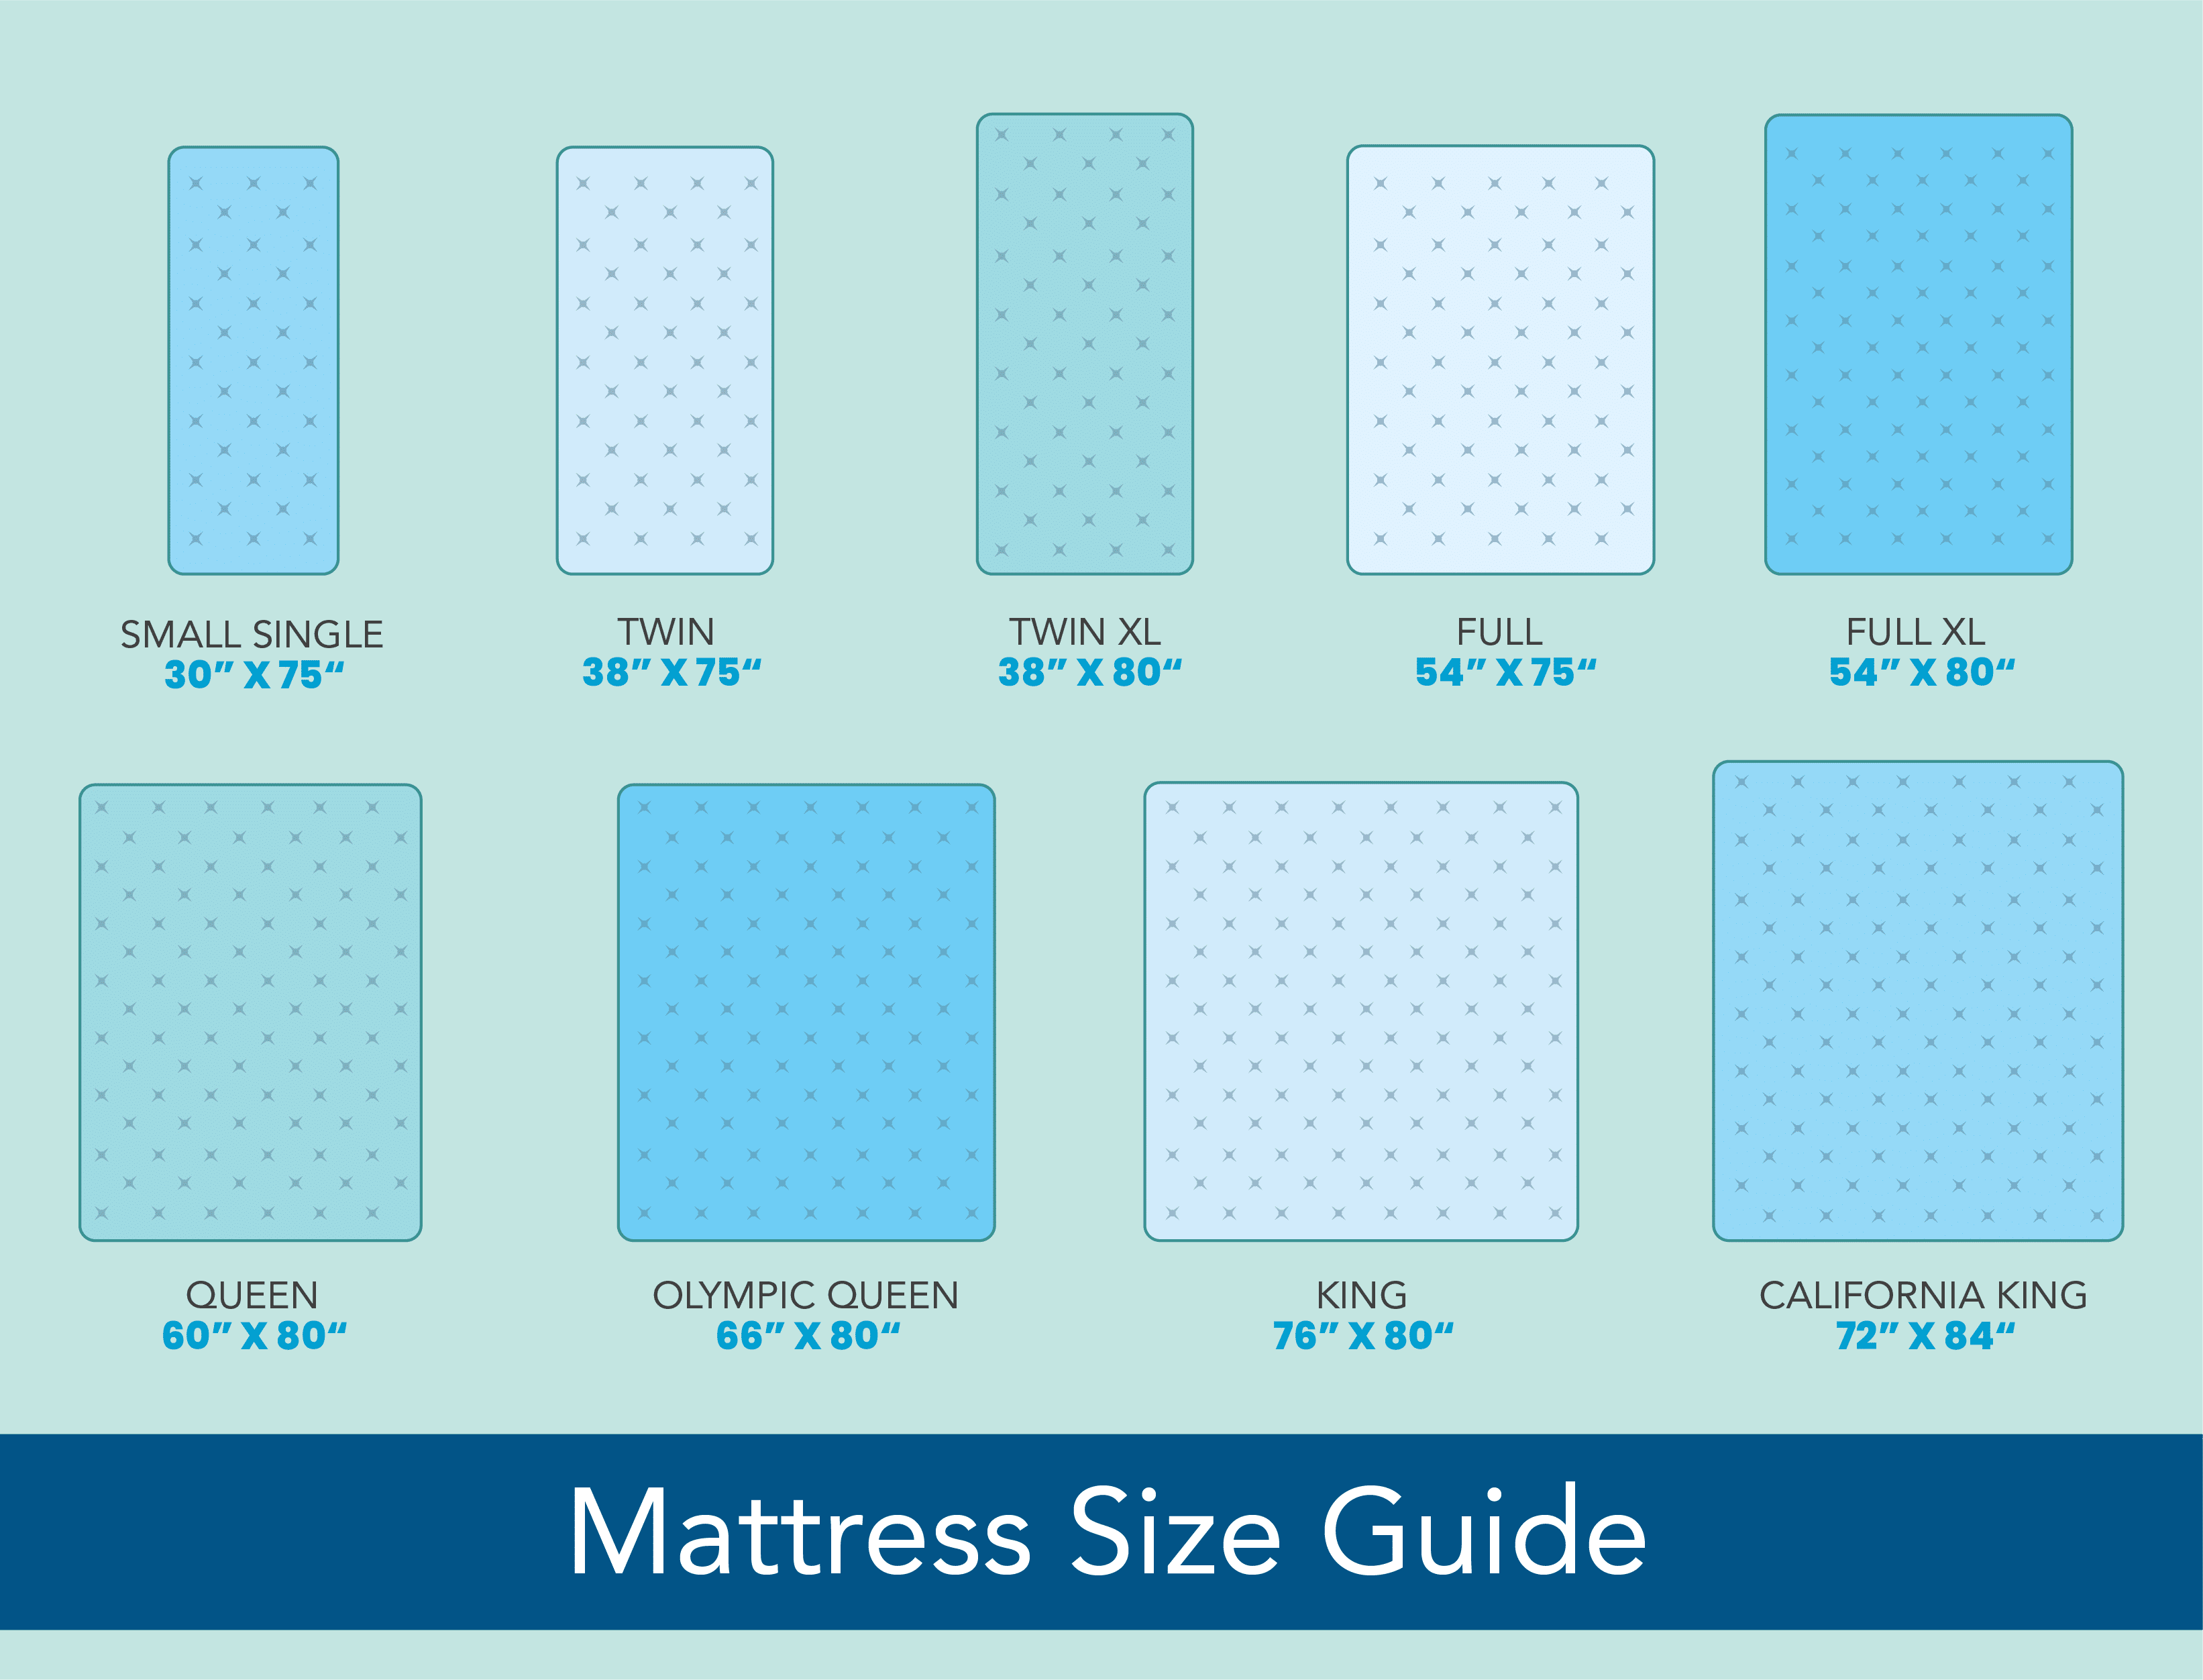 Is there a mattress size between twin and full